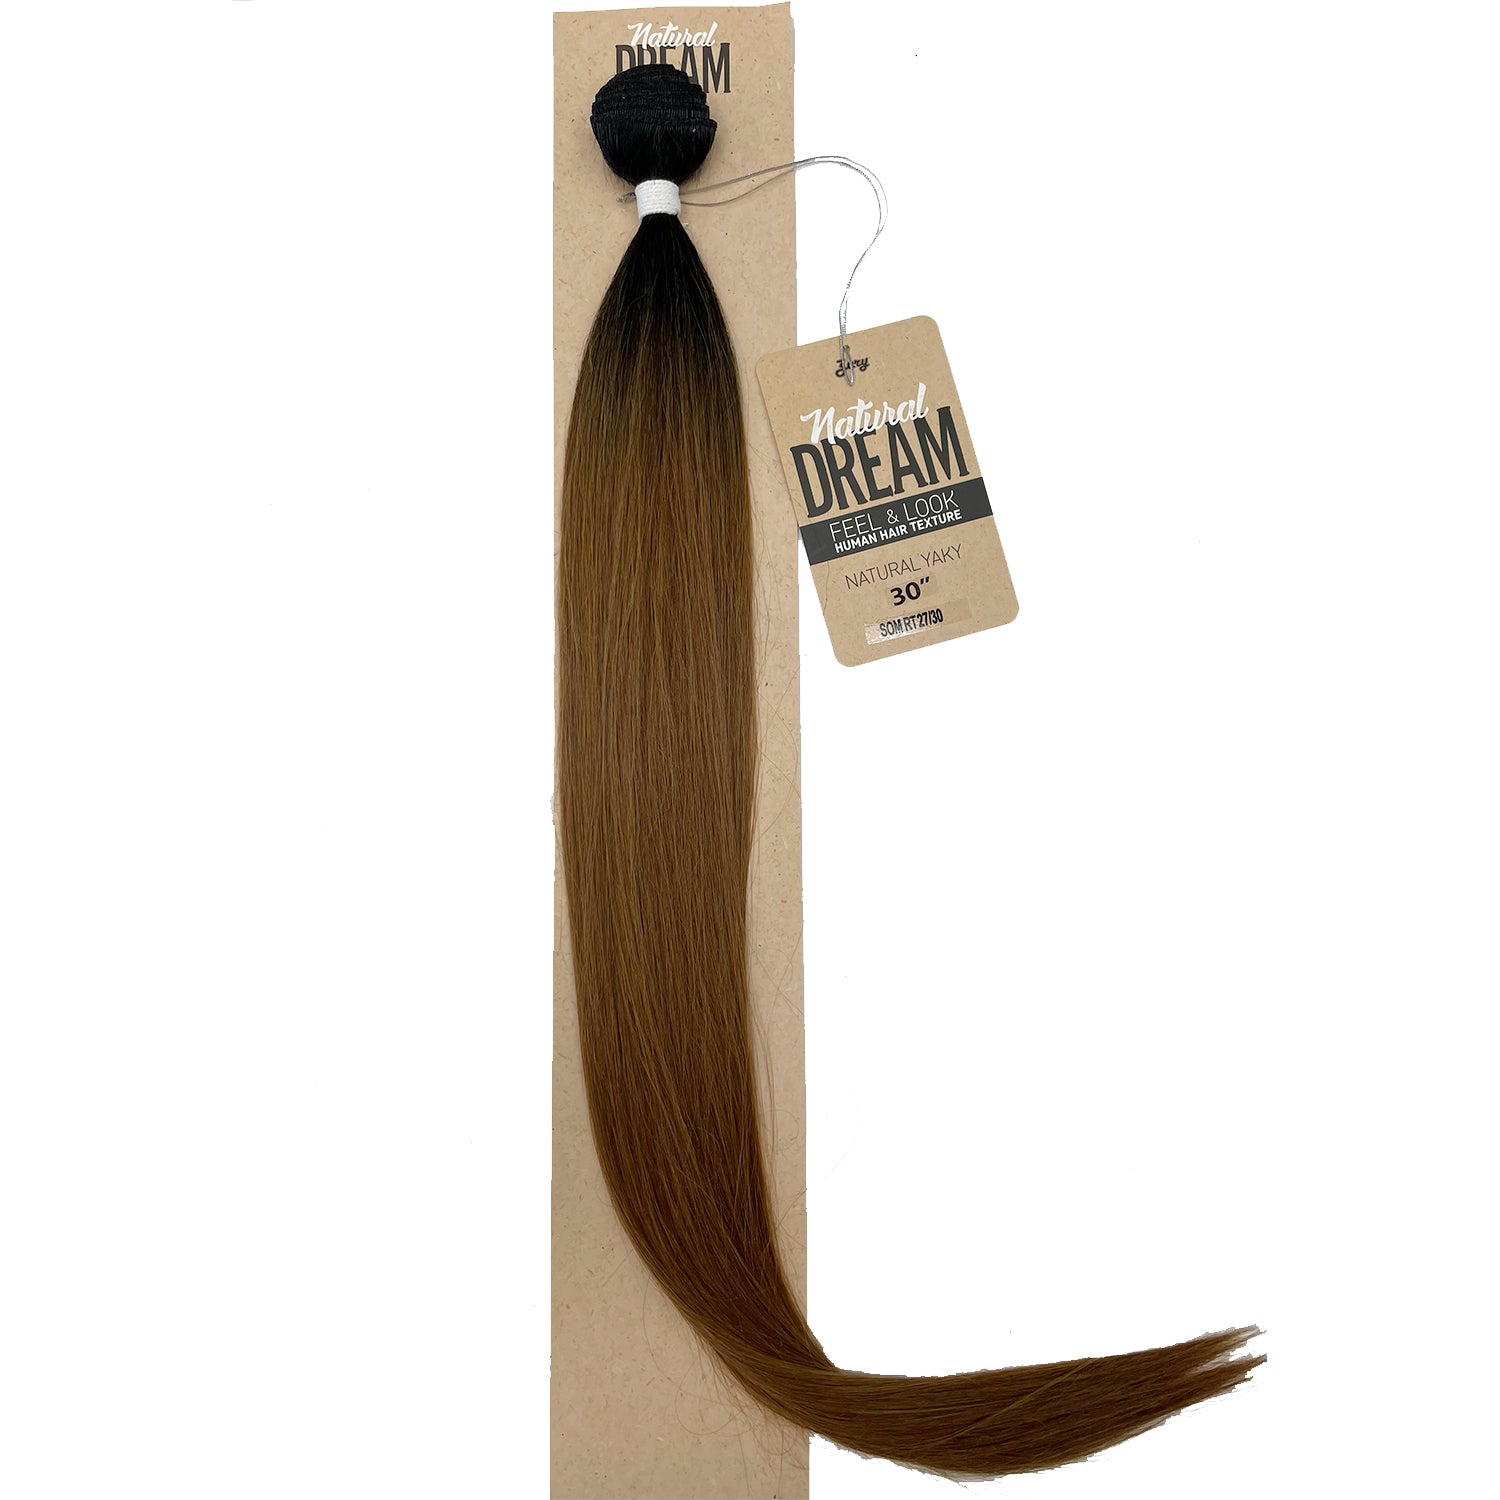 Zury Natural Dream Feel & Look Hair Extension Bundle, Natural Yaky 30" 27 30 brown blonde